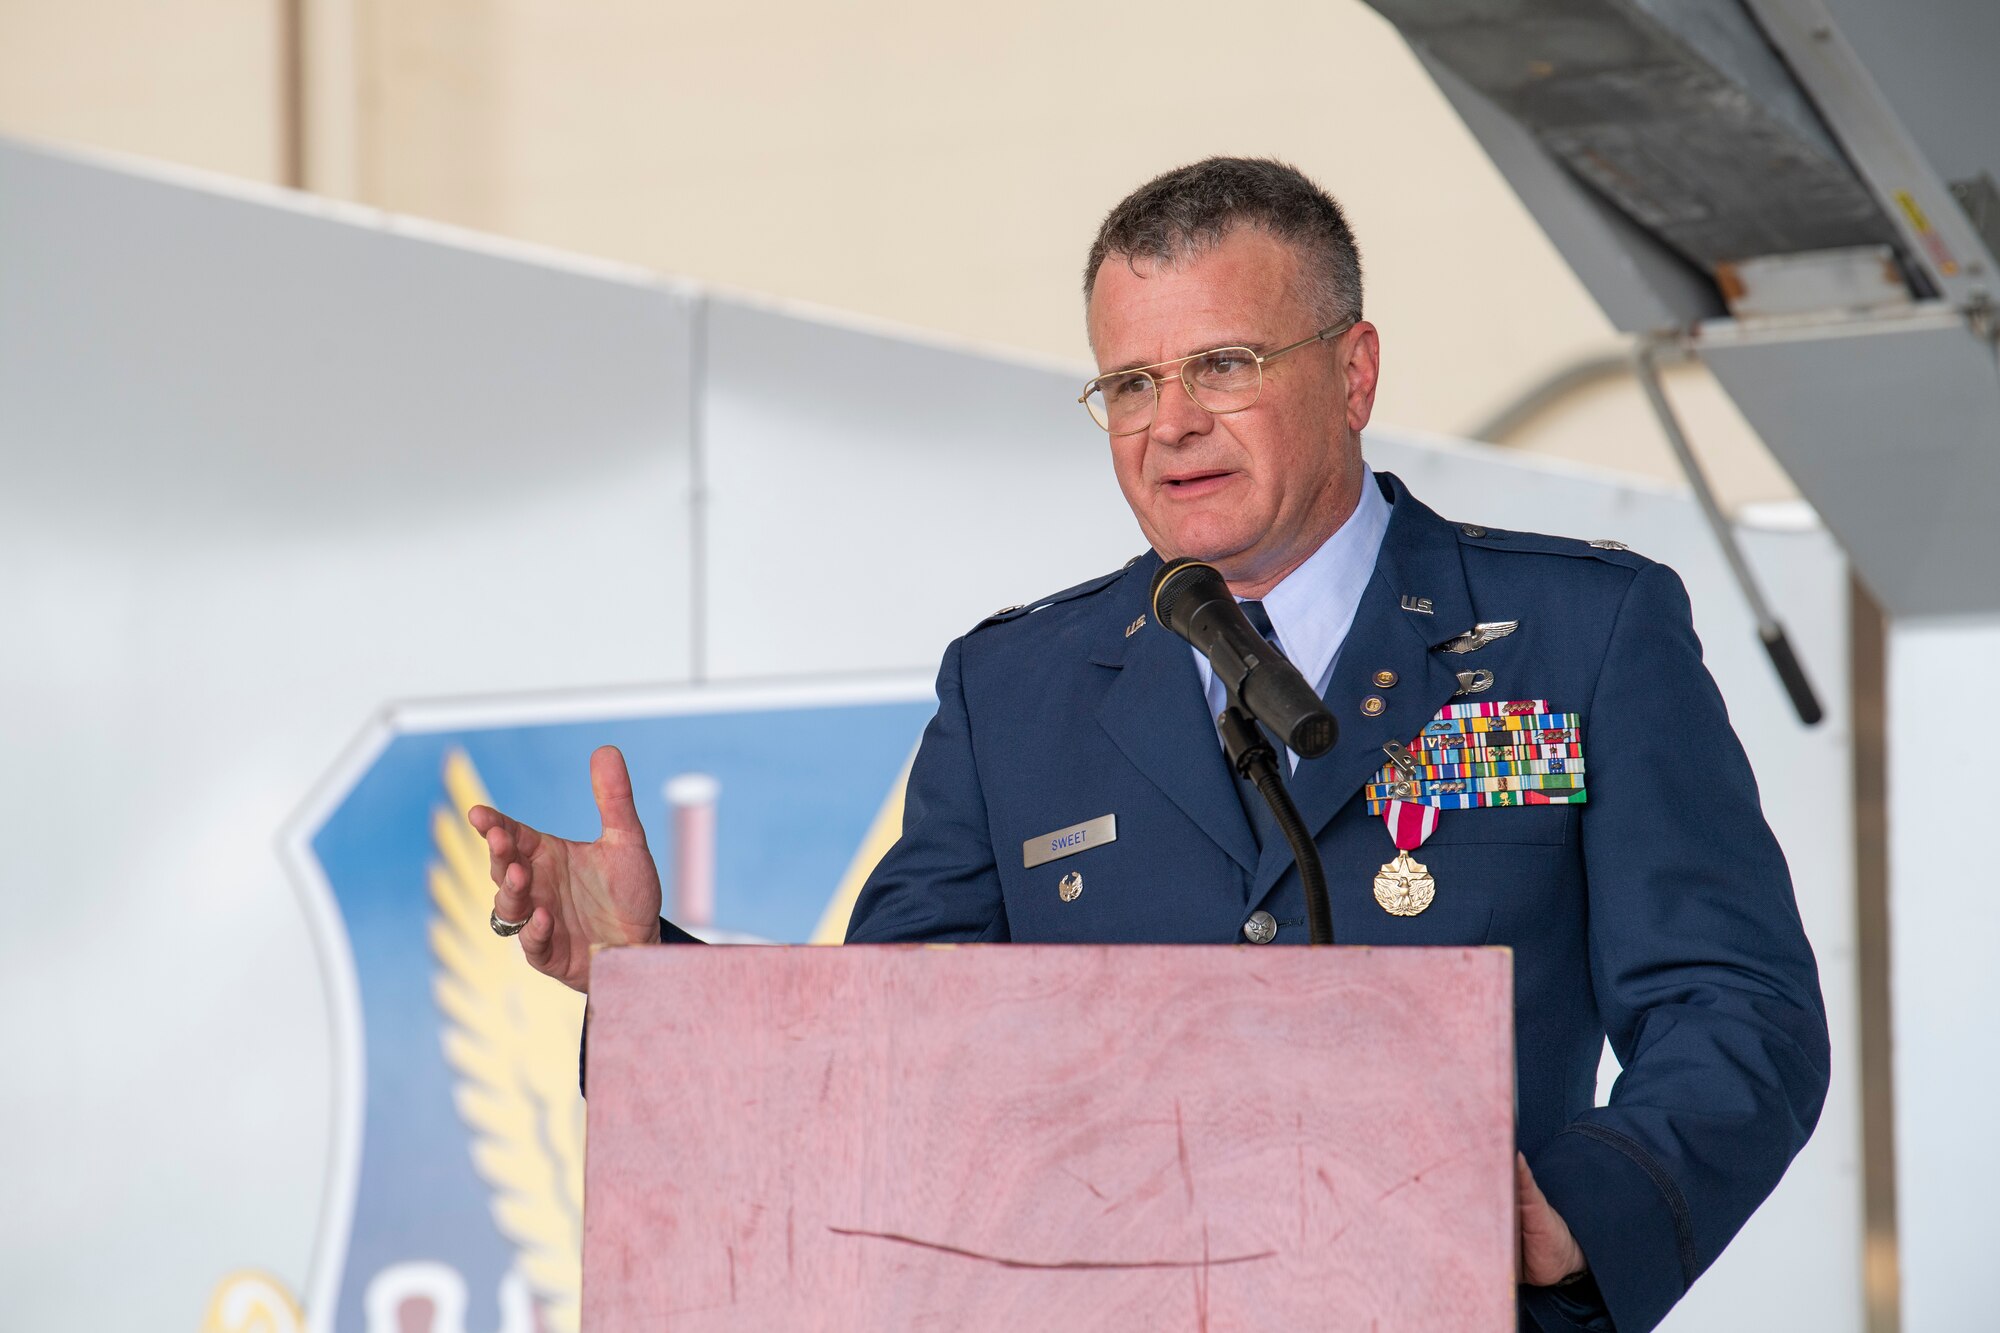 A photo of Lieutenant Colonel Rob Sweet speaking at a podium